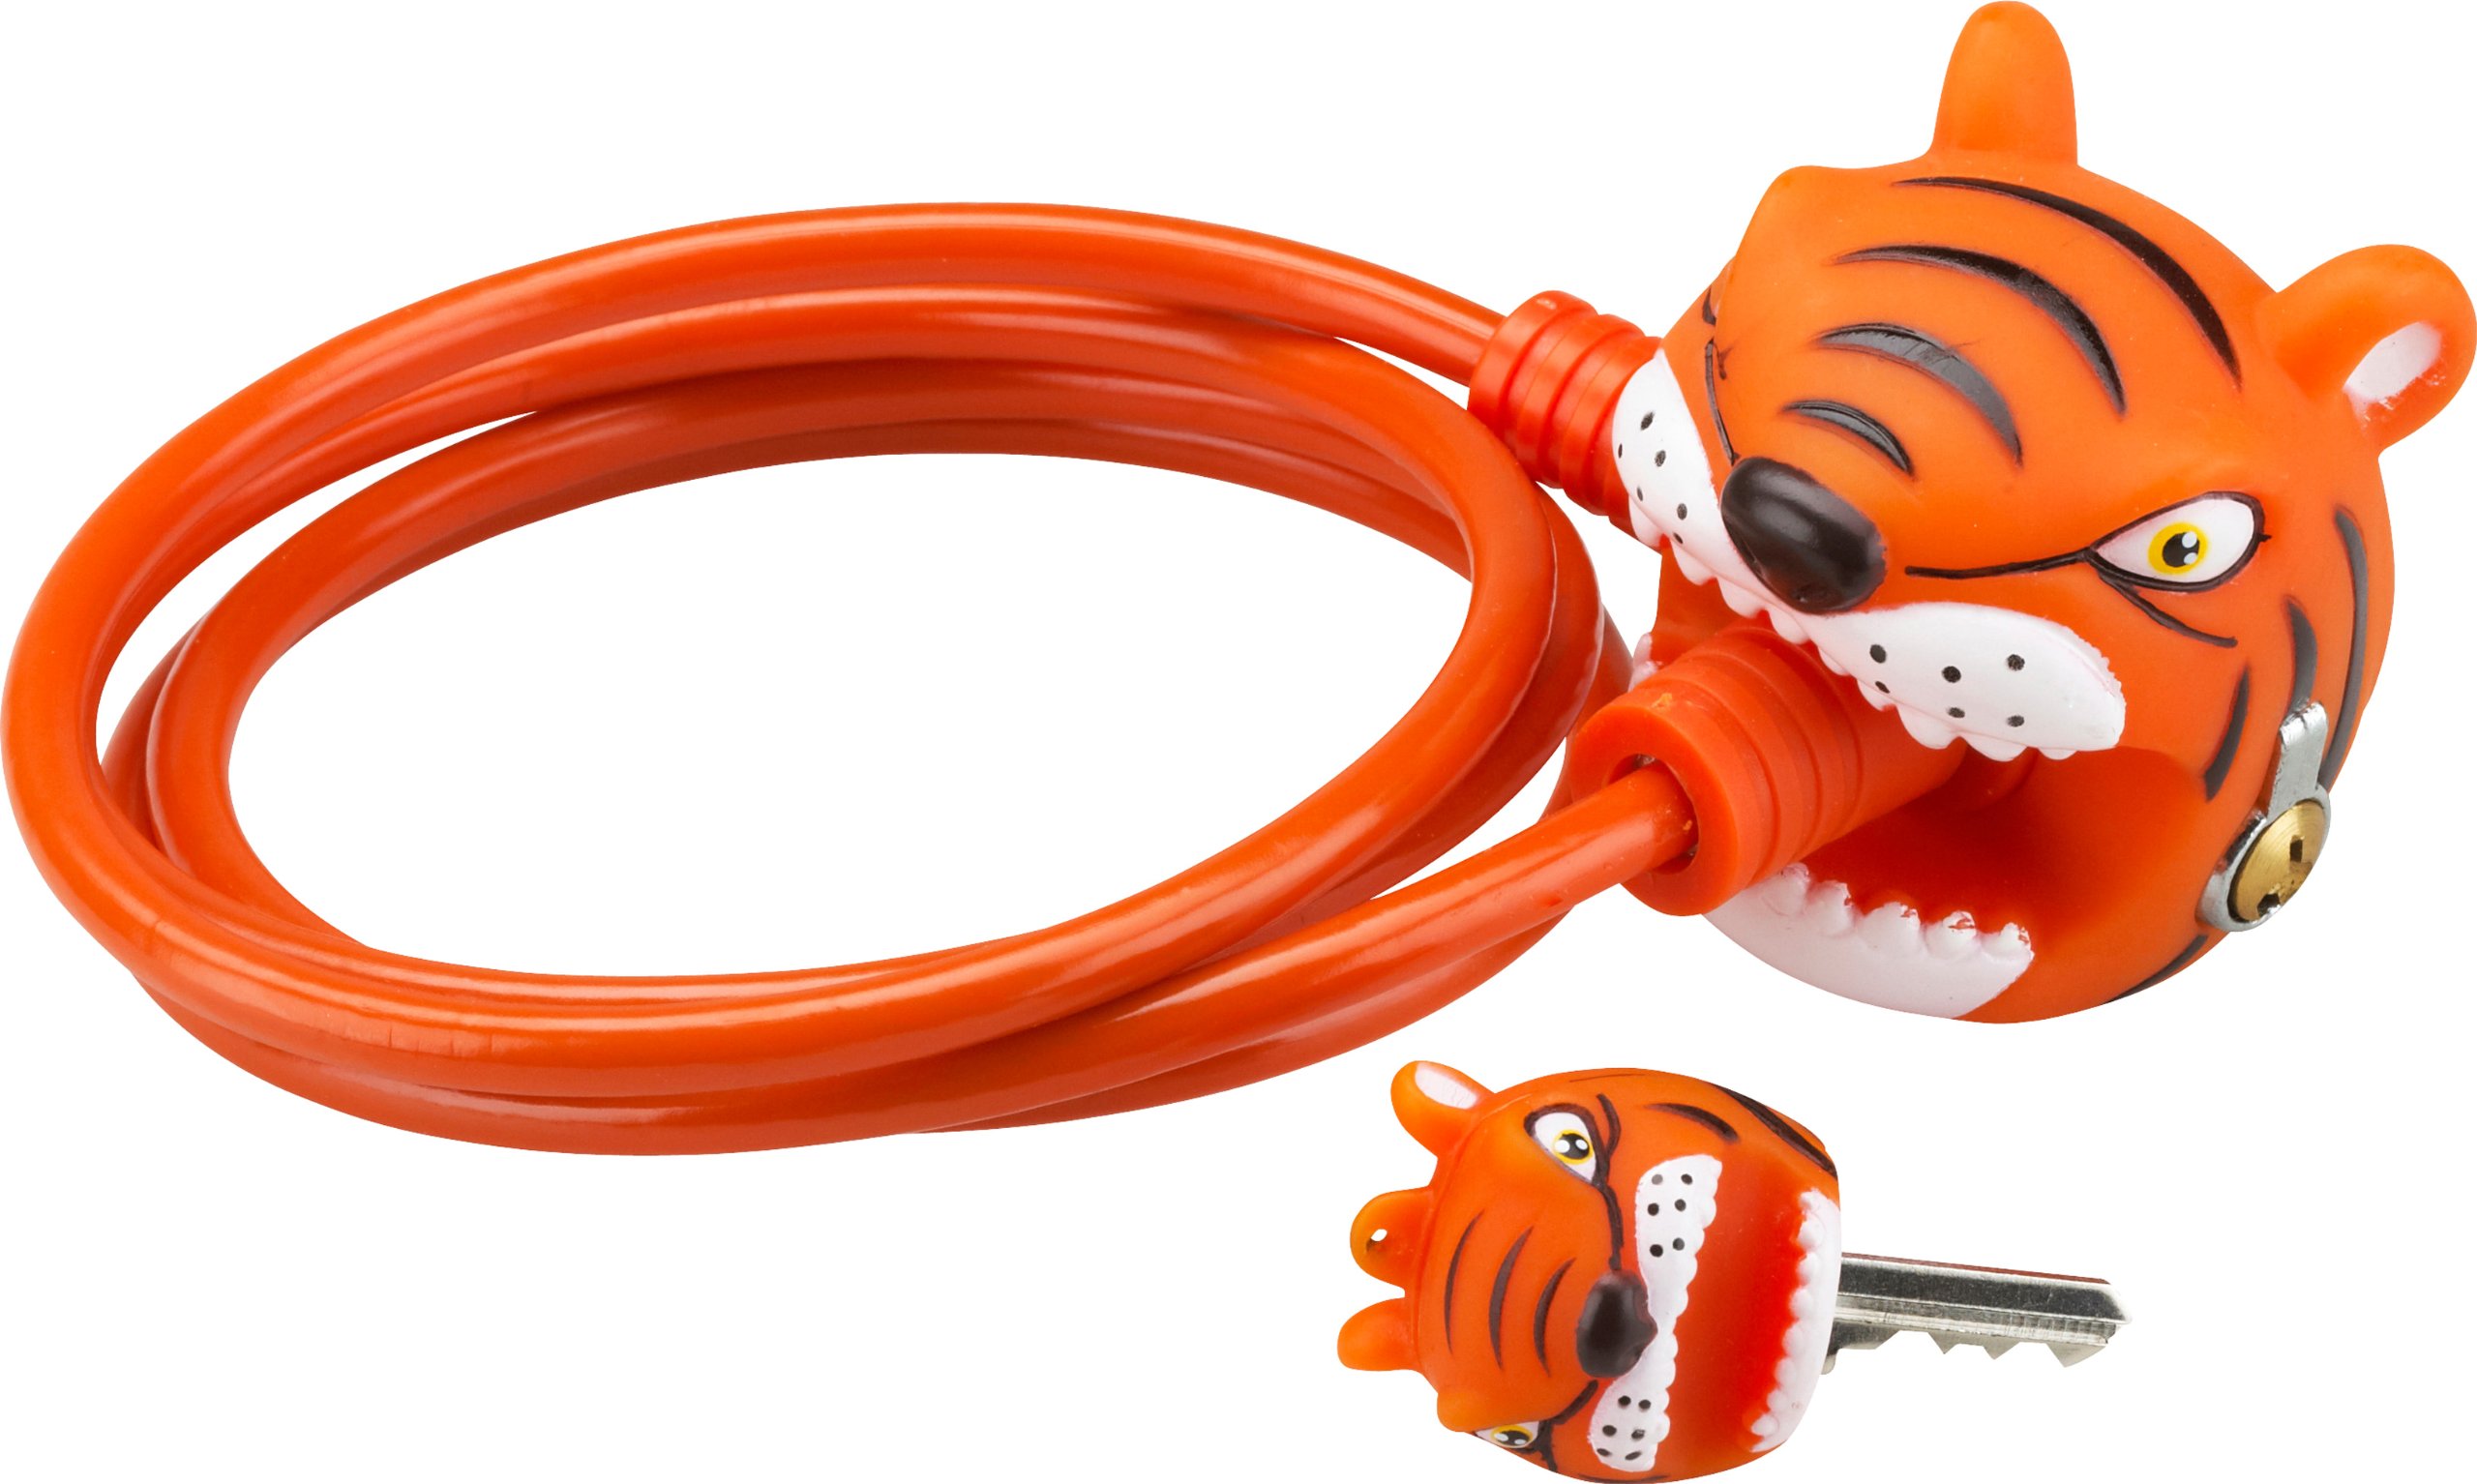 CZK08 Crazy Safety Tiger Cable Lock